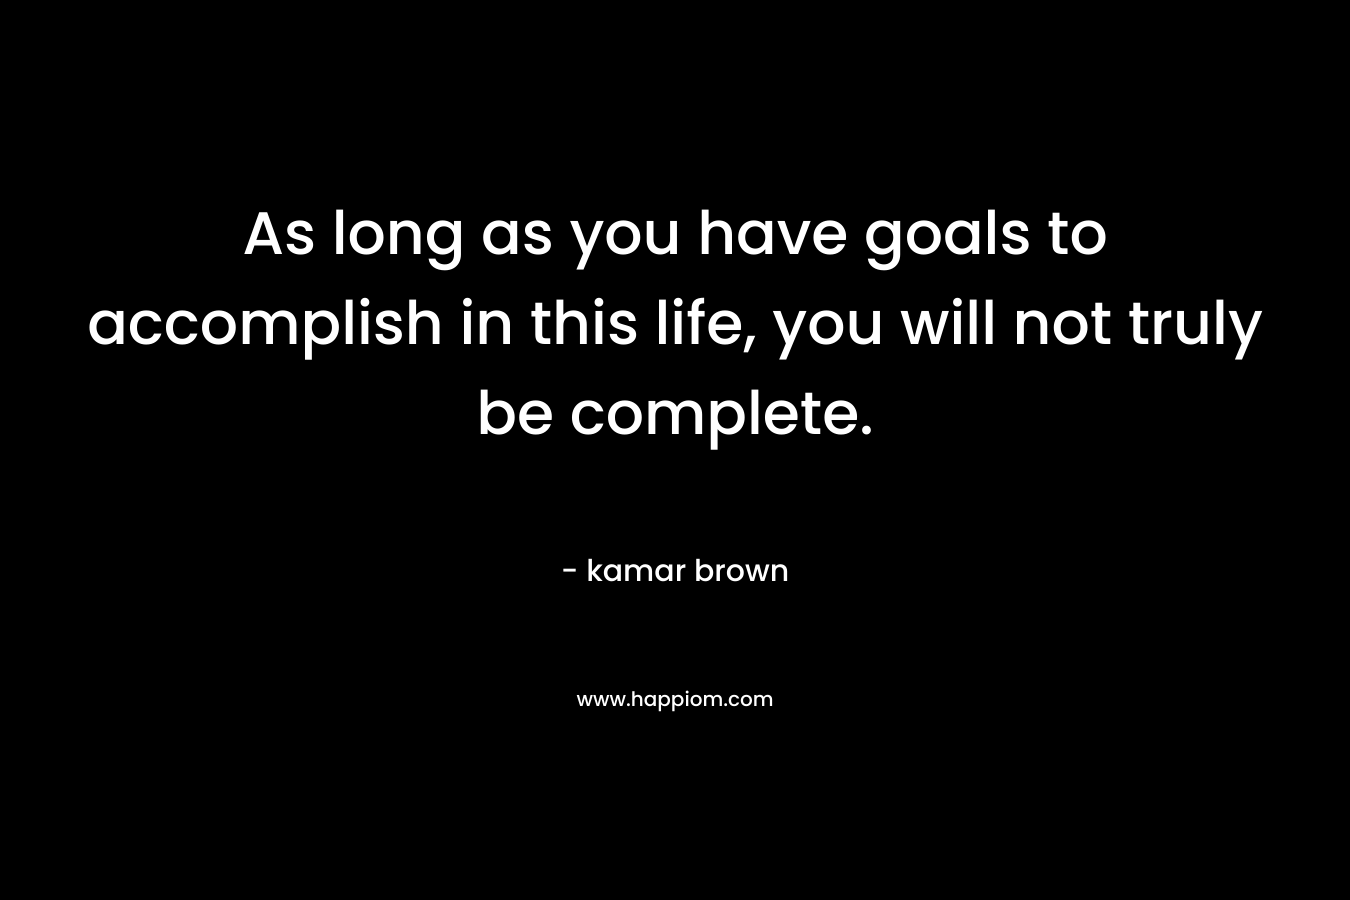 As long as you have goals to accomplish in this life, you will not truly be complete.